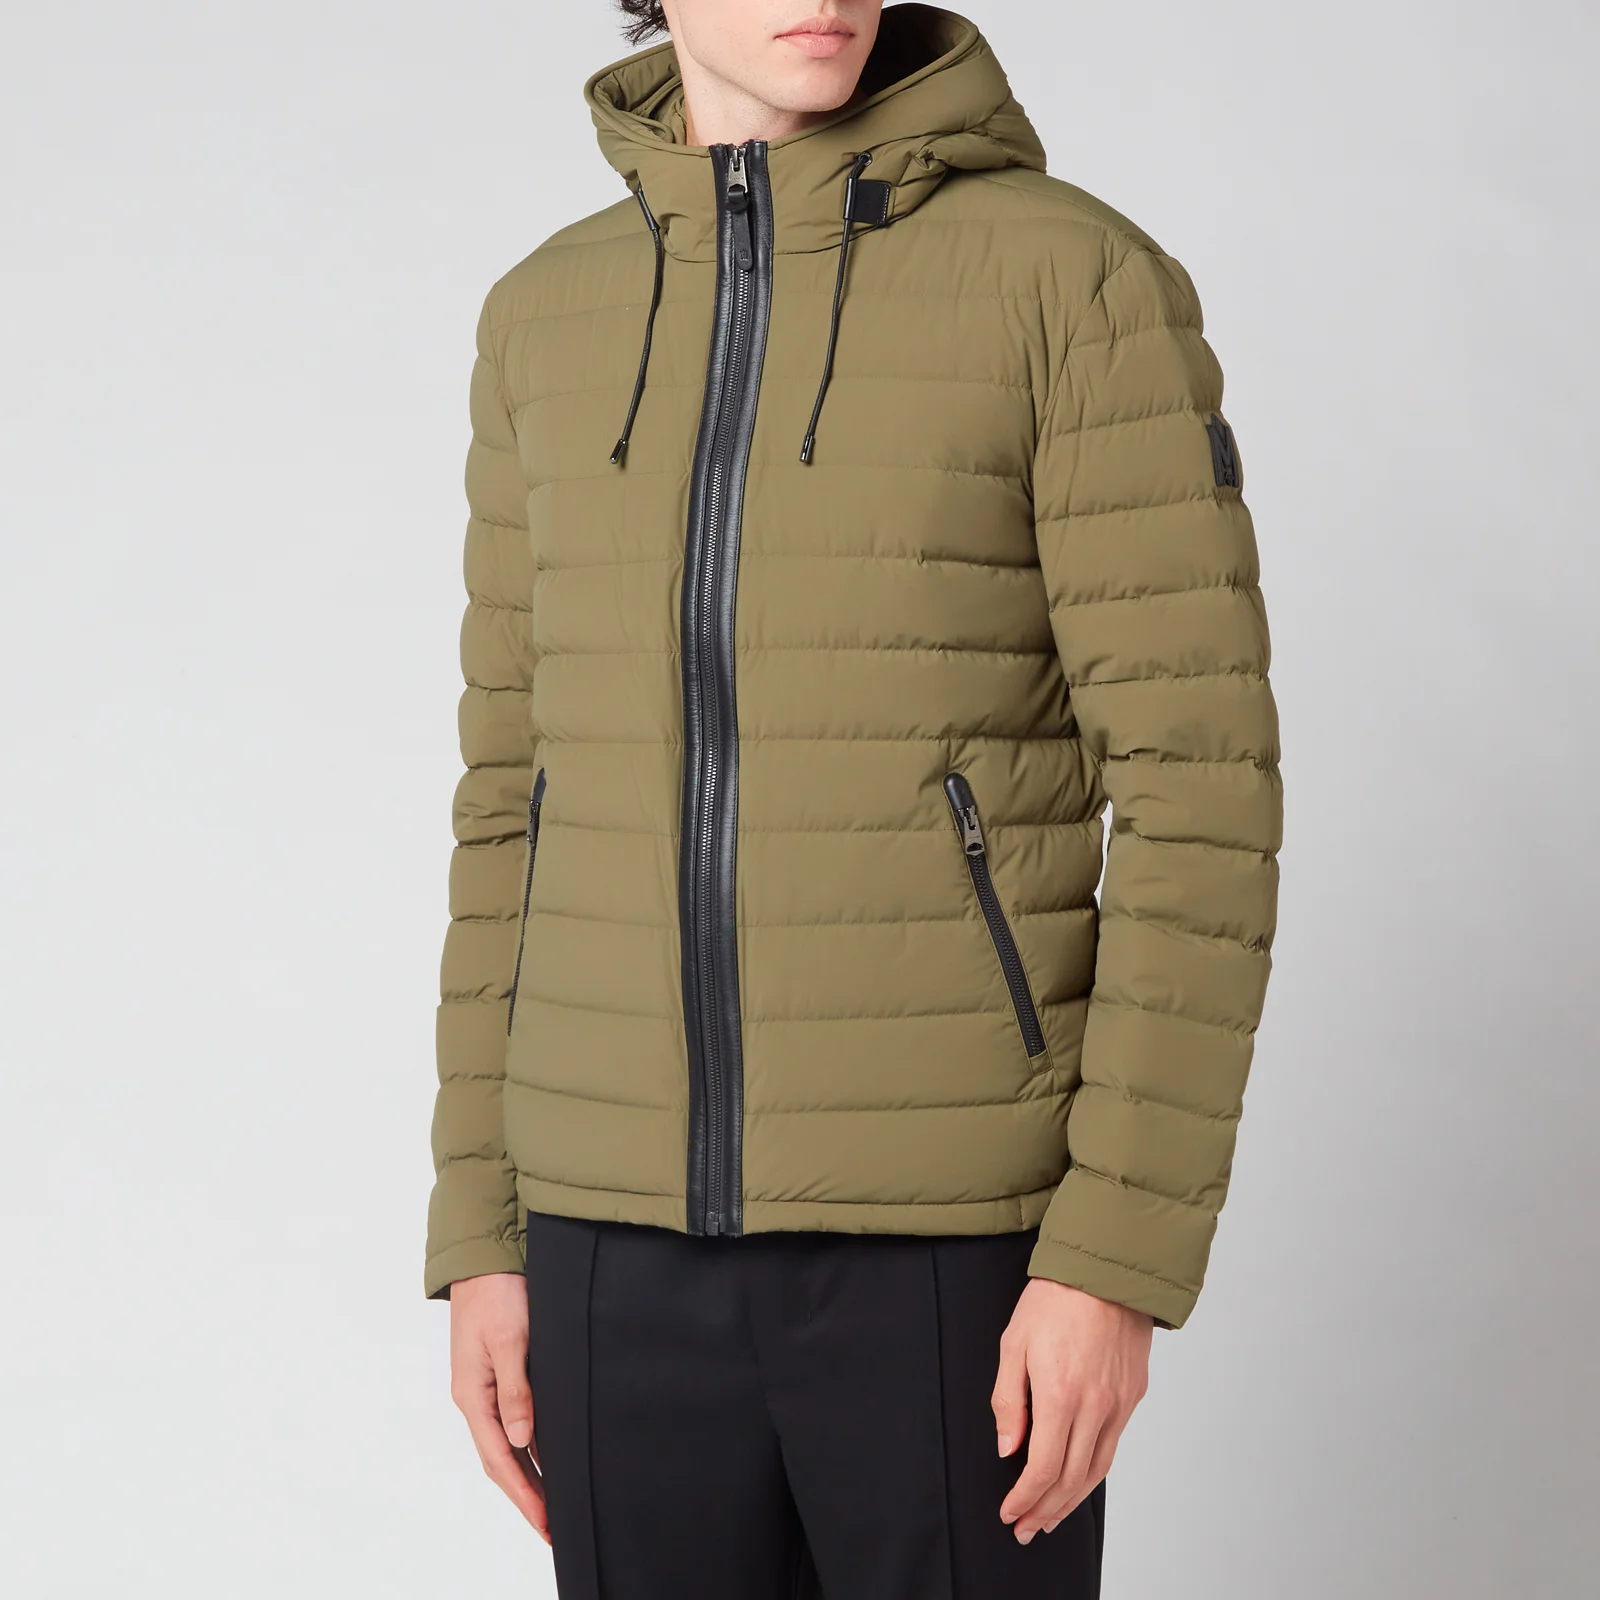 Mackage Men's Mike Stretch Lightweight Down Jacket With Hood - Olive Image 1